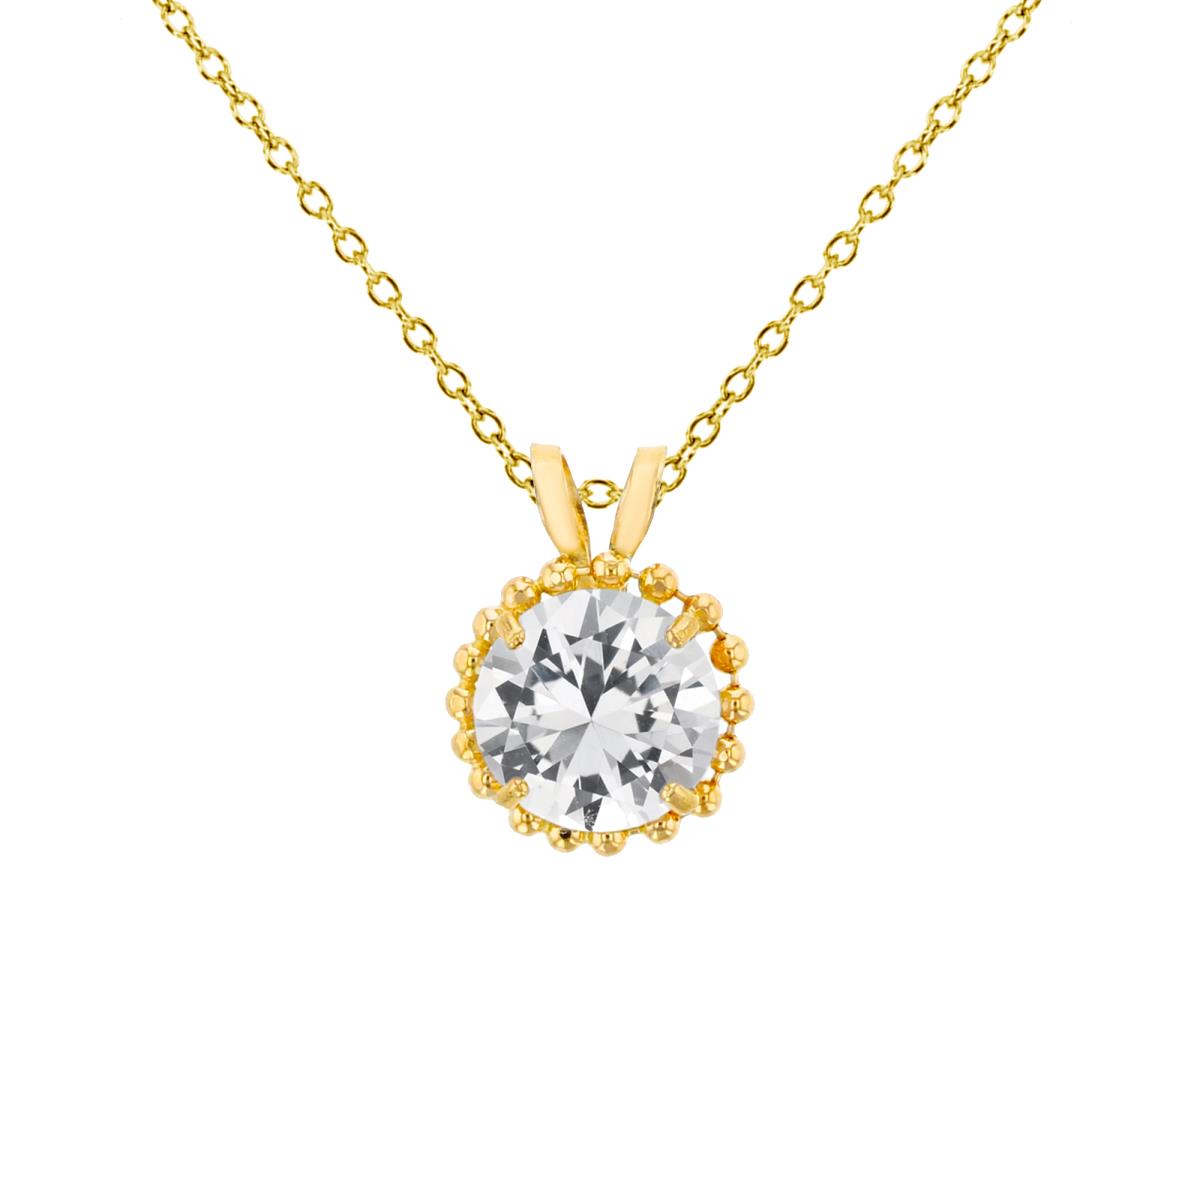 10K Yellow Gold 6mm Round Cut CZ with Bead Frame Rabbit Ear 18" Necklace